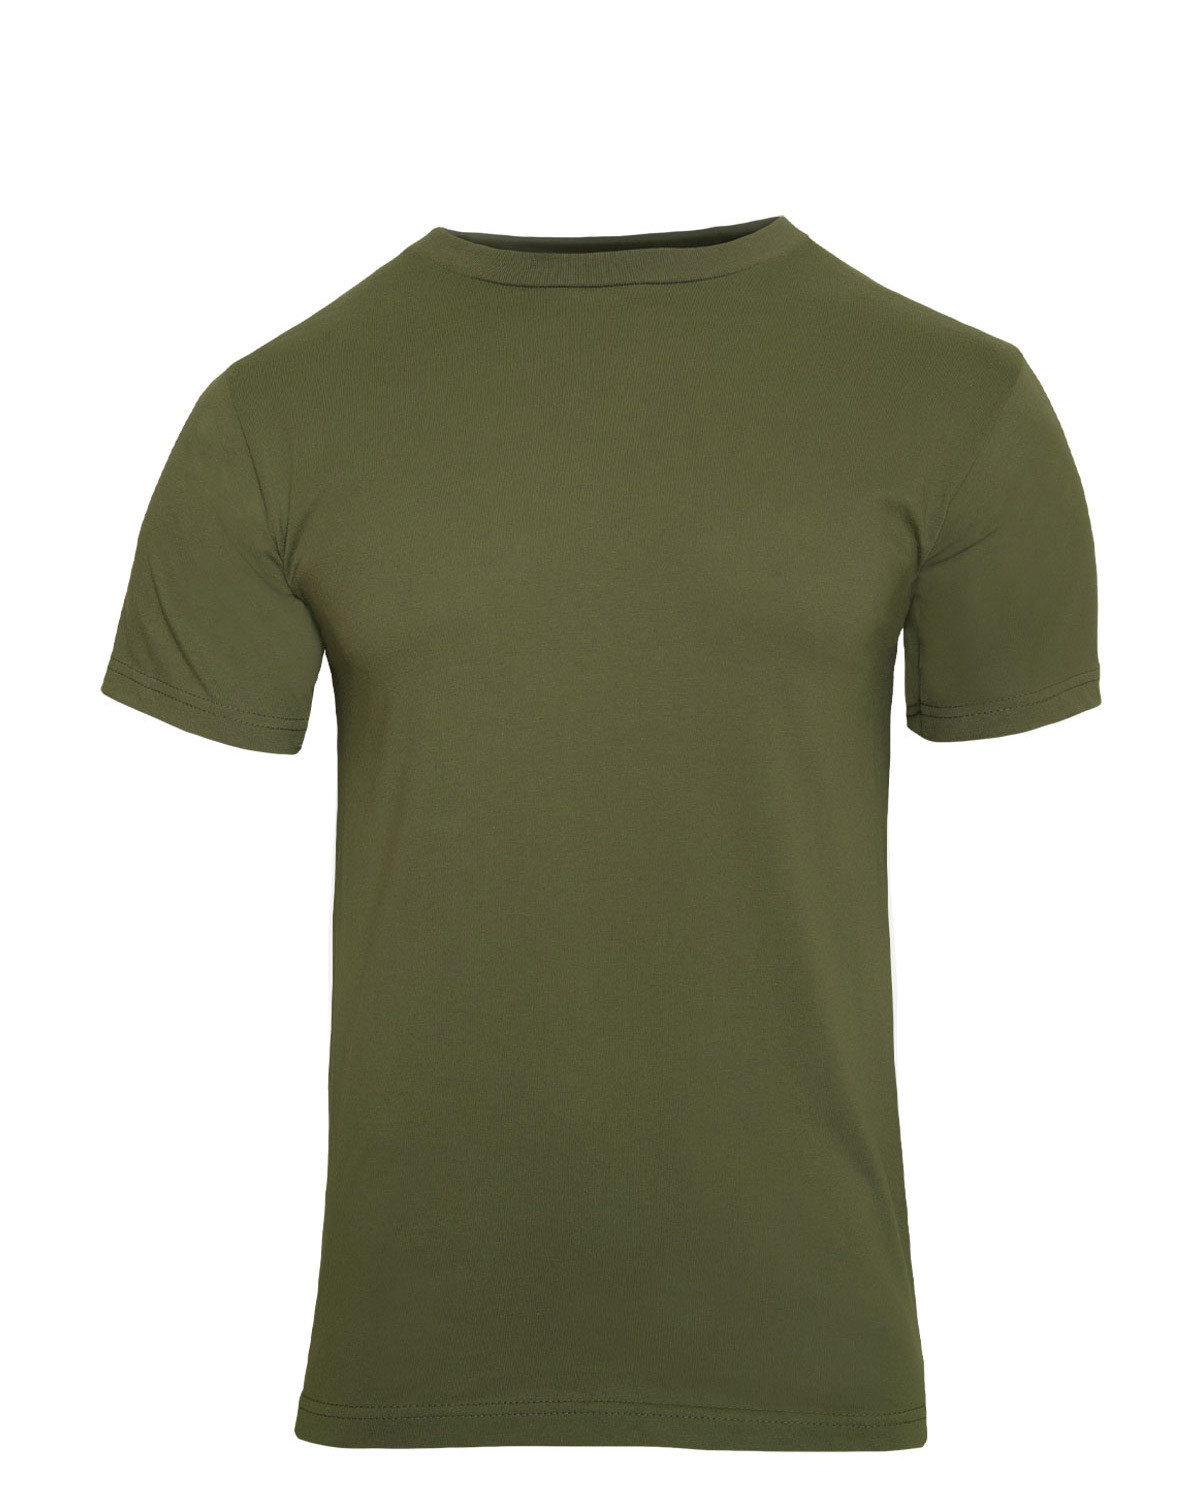 7: Rothco Bomulds T-Shirt (Oliven, S)